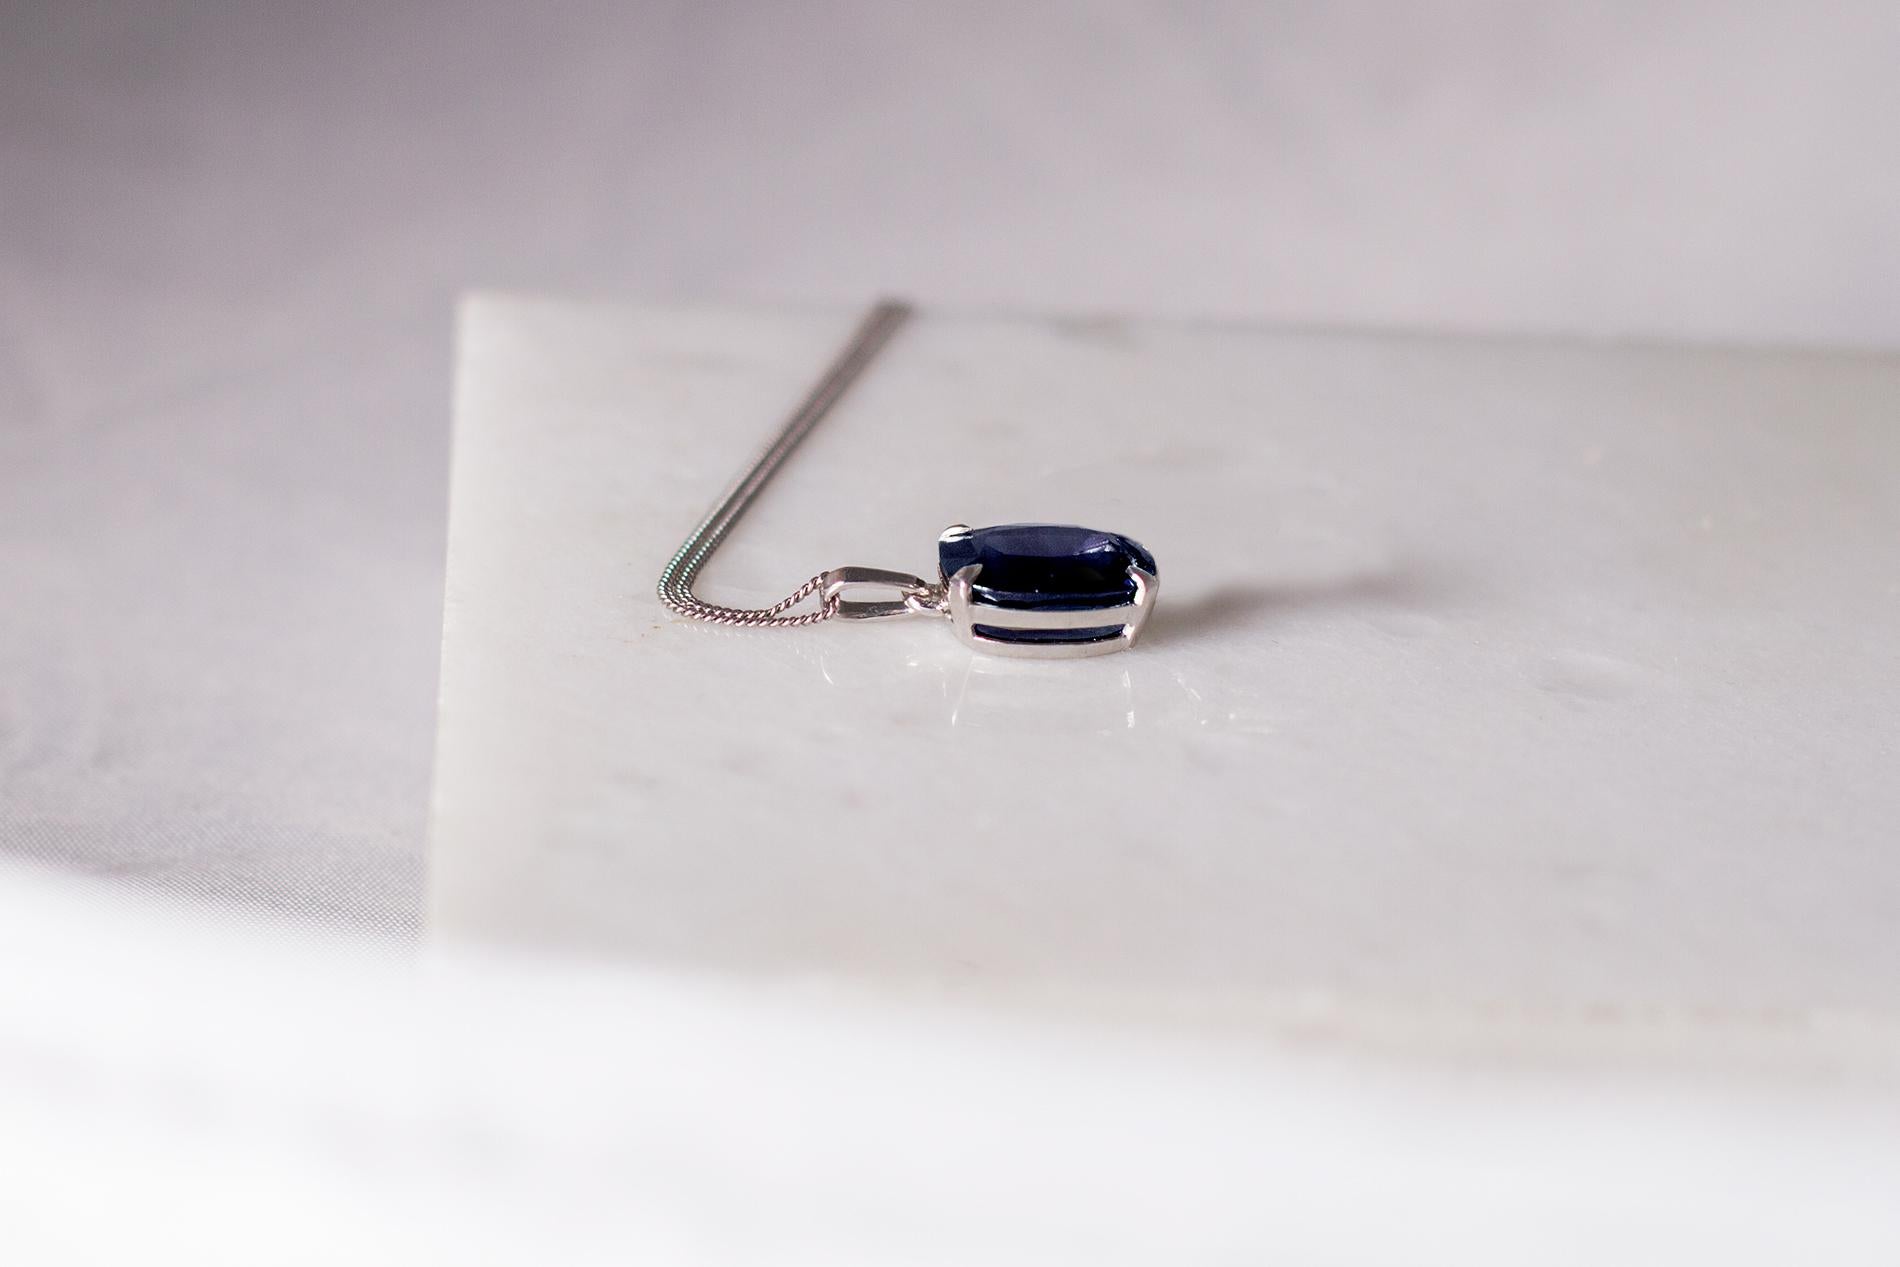 This contemporary pendant necklace features an unheated natural dark blue cushion sapphire weighing 4.61 carats and measuring 11.6x10mm. It belongs to the Tea collection, which was featured in Vogue UA.

The Tea collection began with a small charm